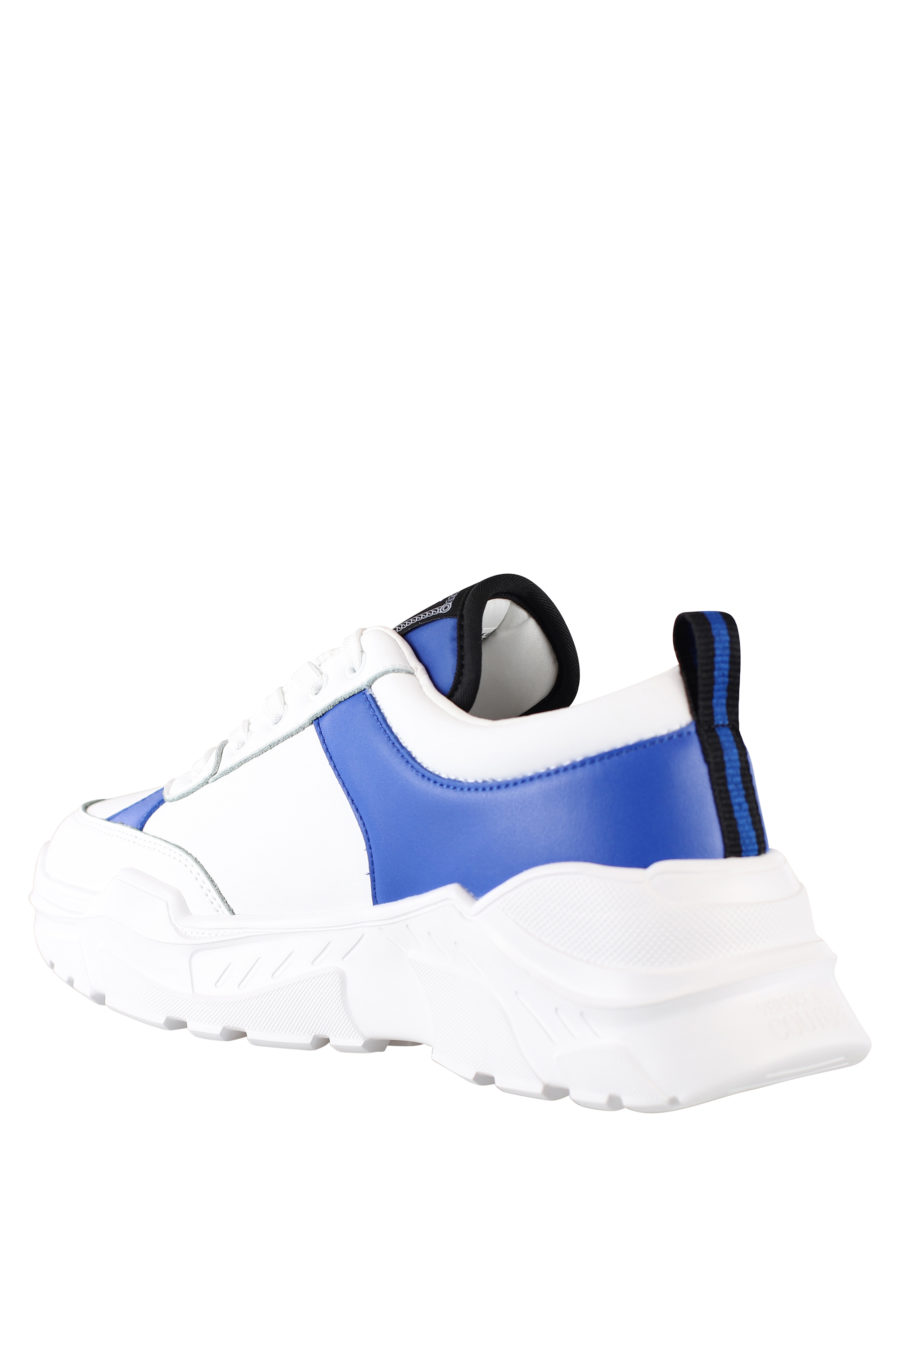 White and blue "Speedtrack" shoes - IMG 1938